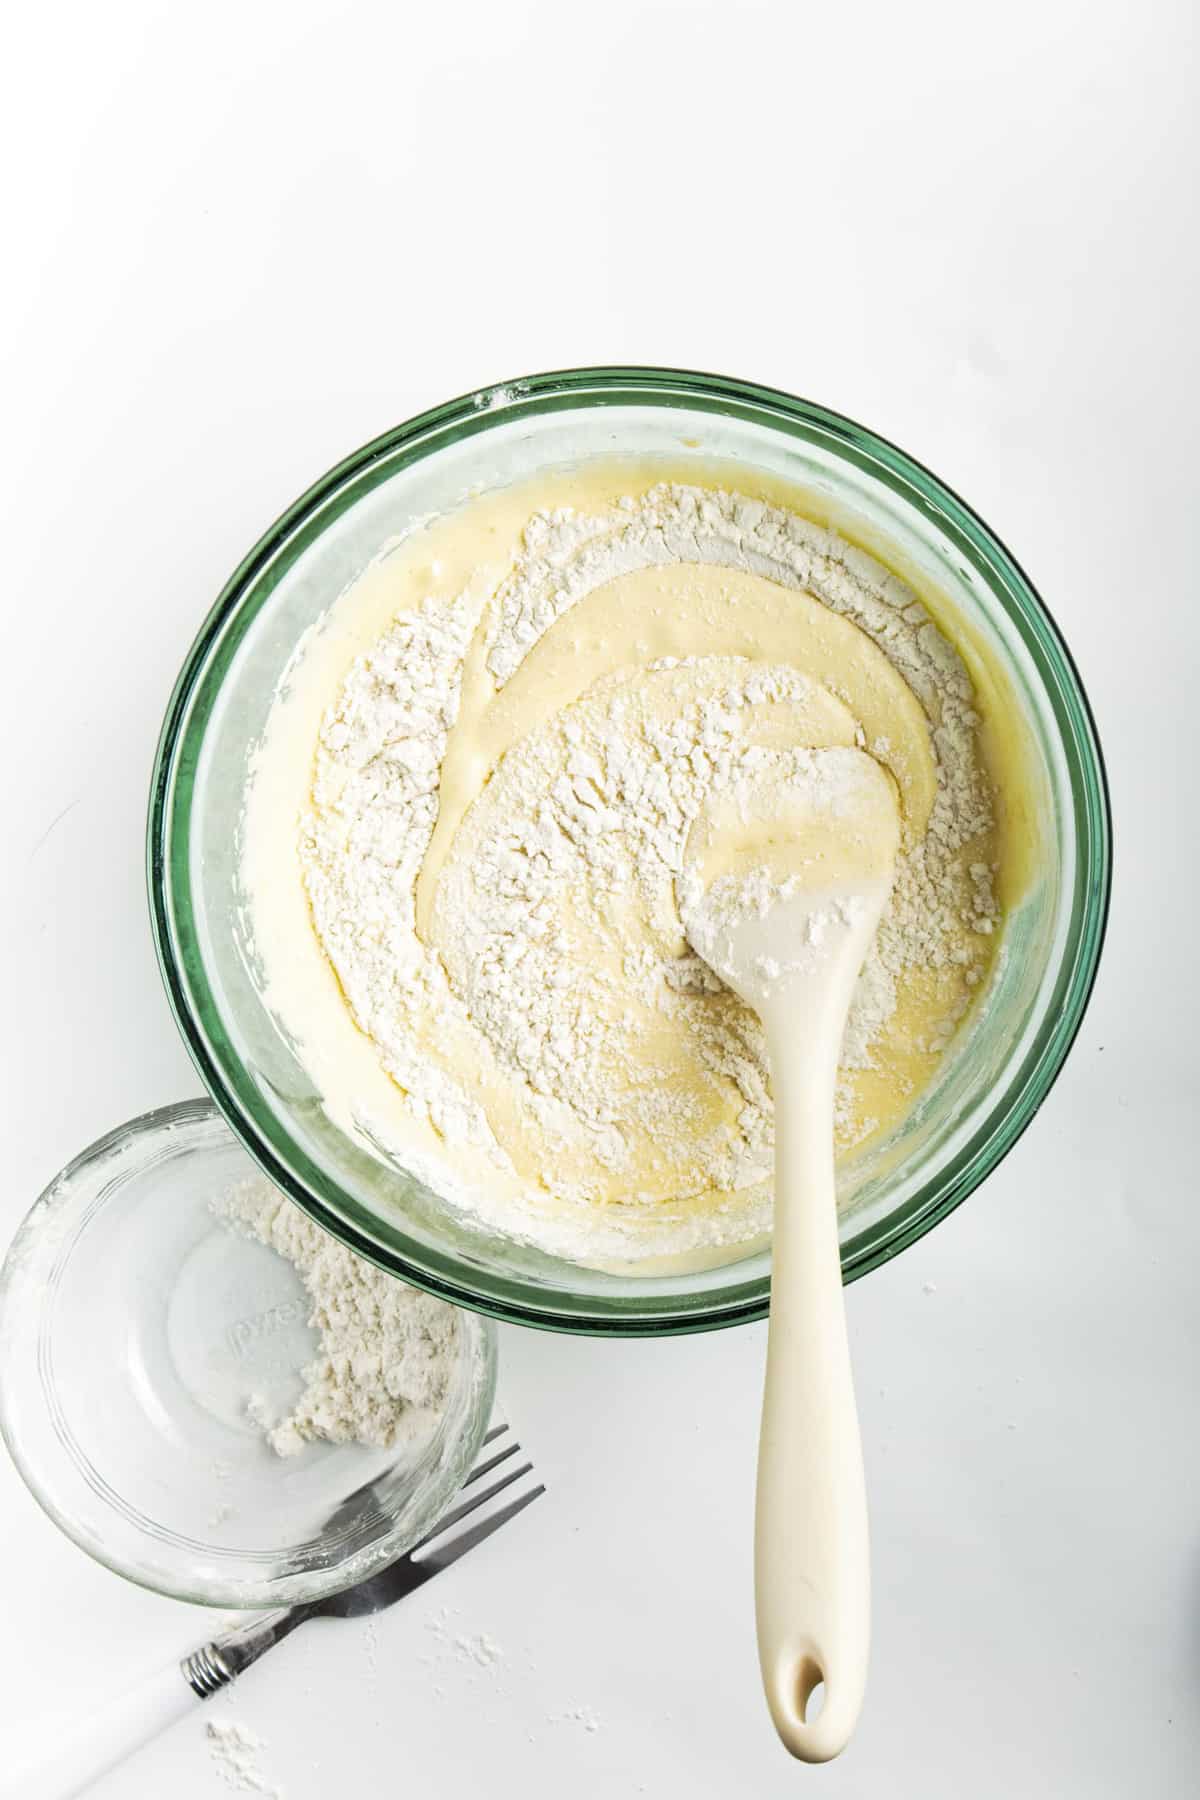 Batter for cookies in a glass bowl with wooden spoon.  